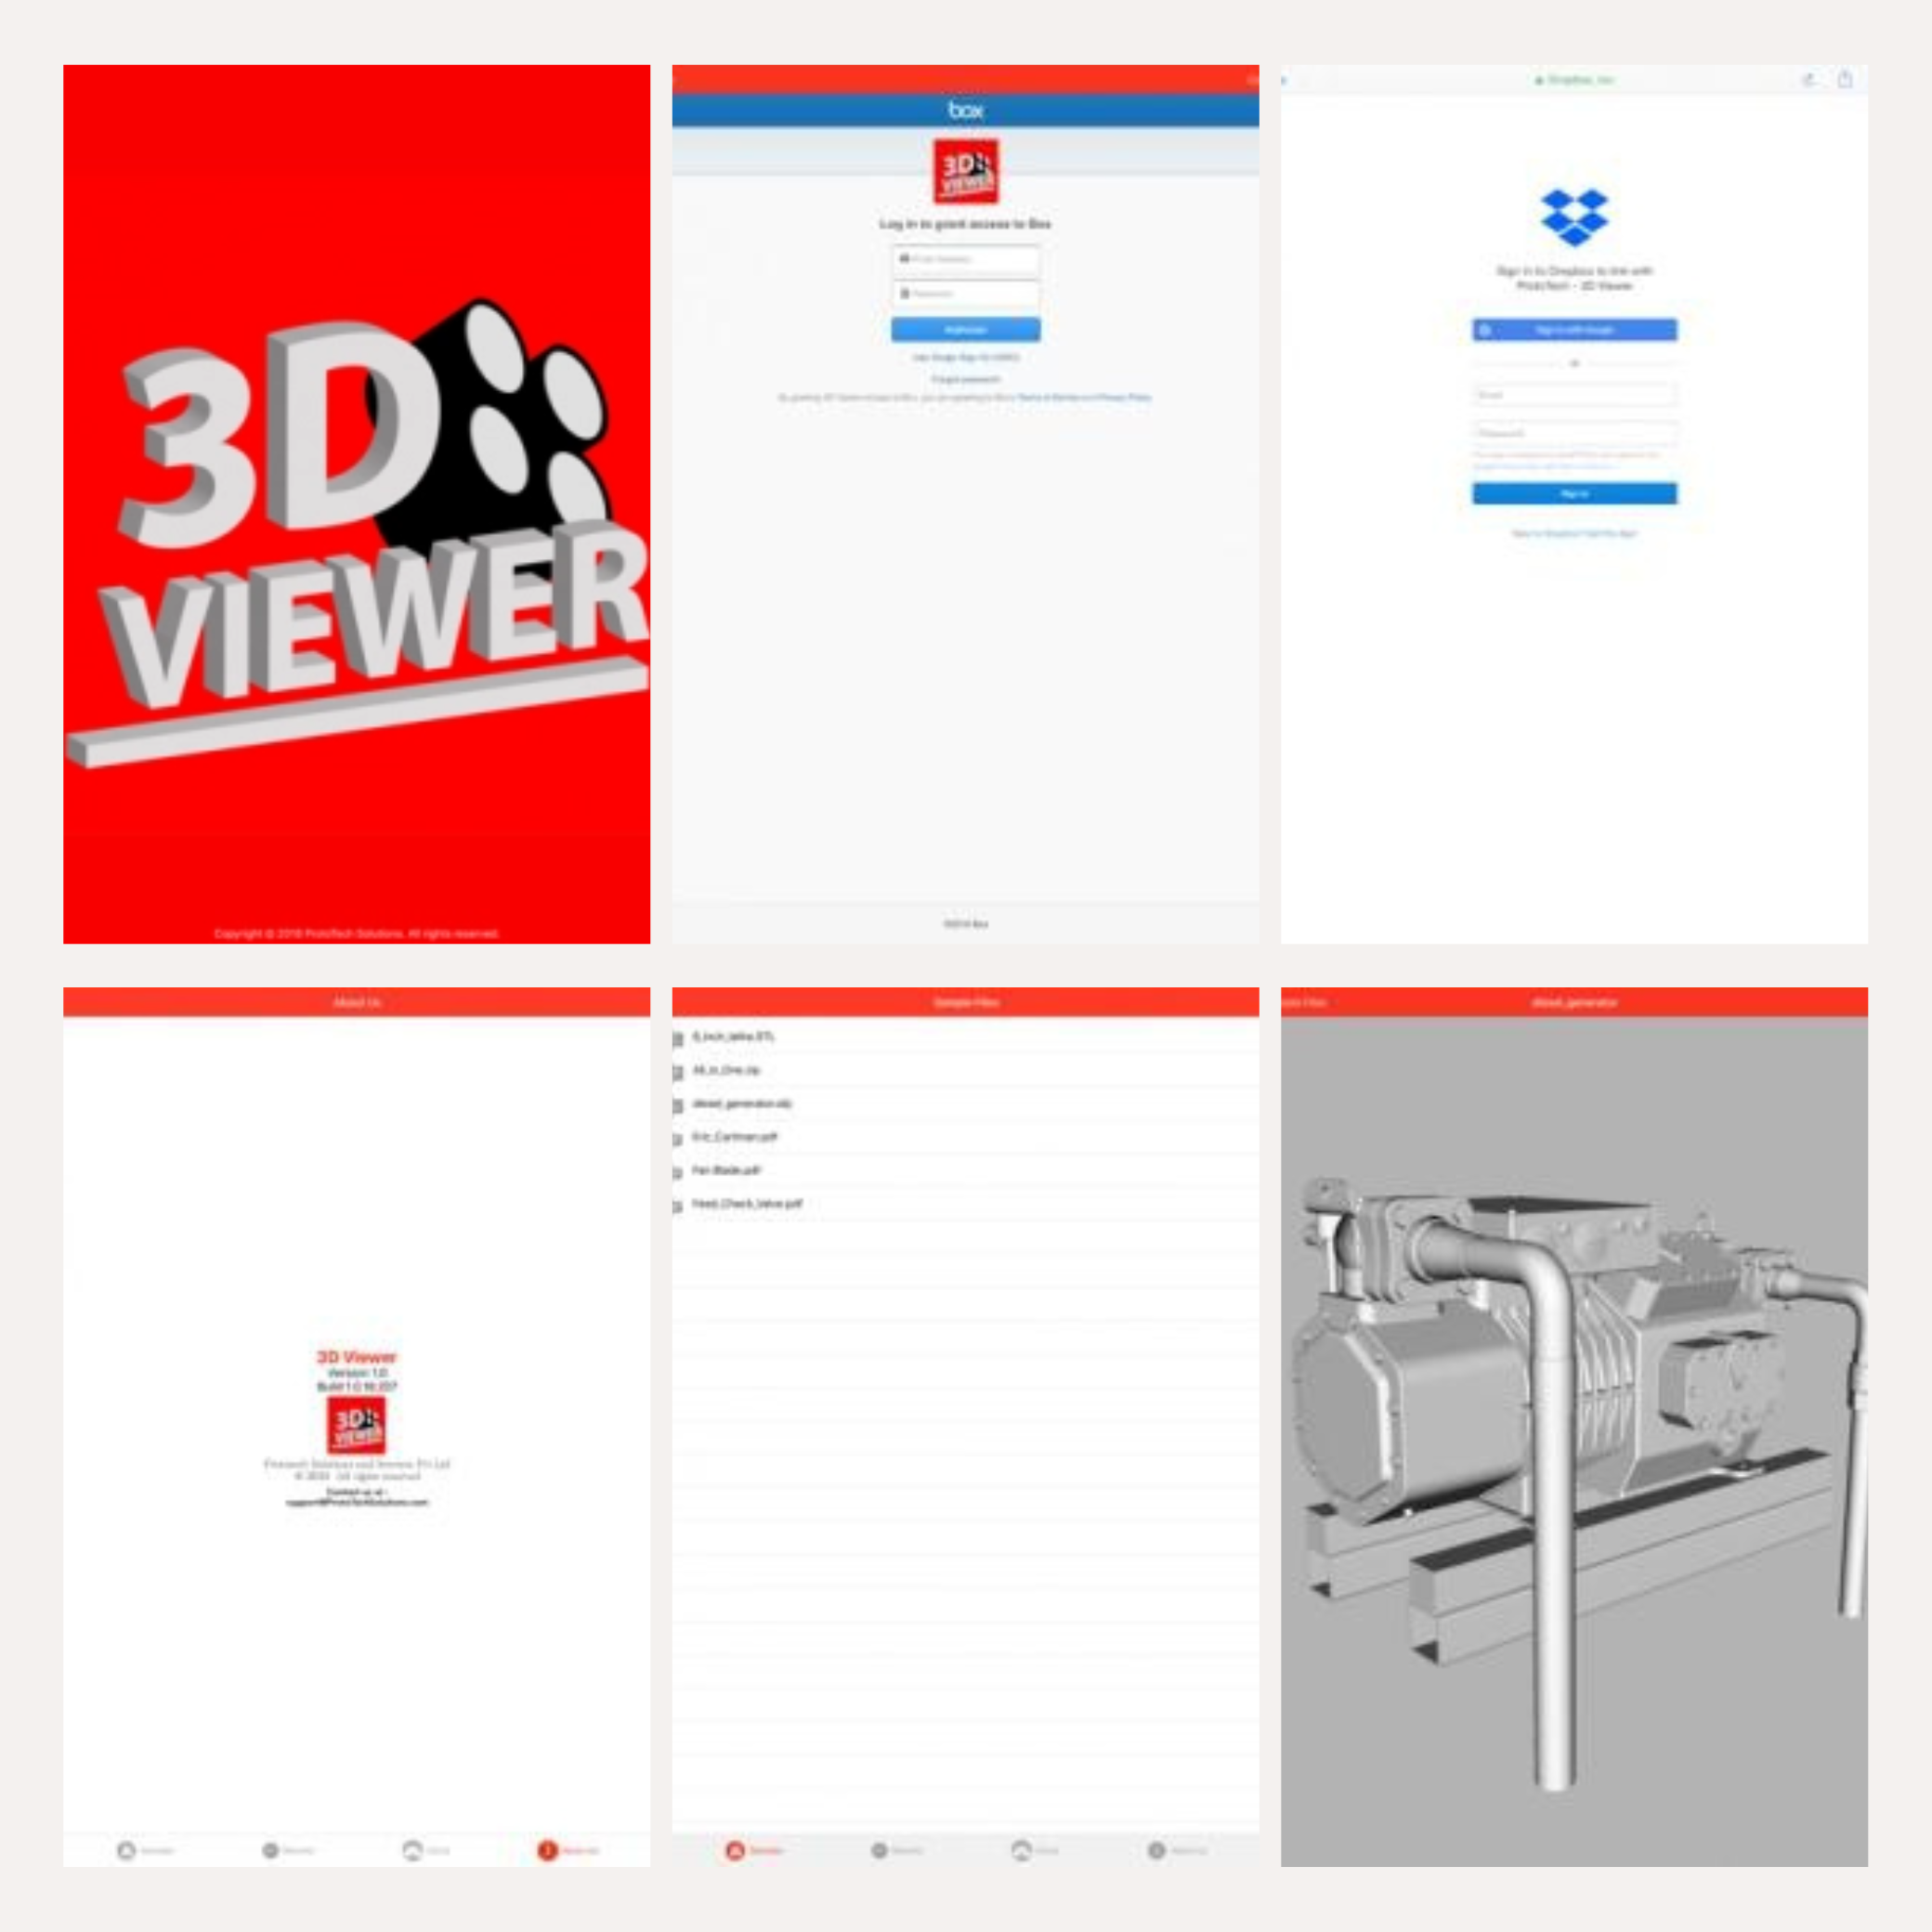 Features of 3D viewer for iOS device